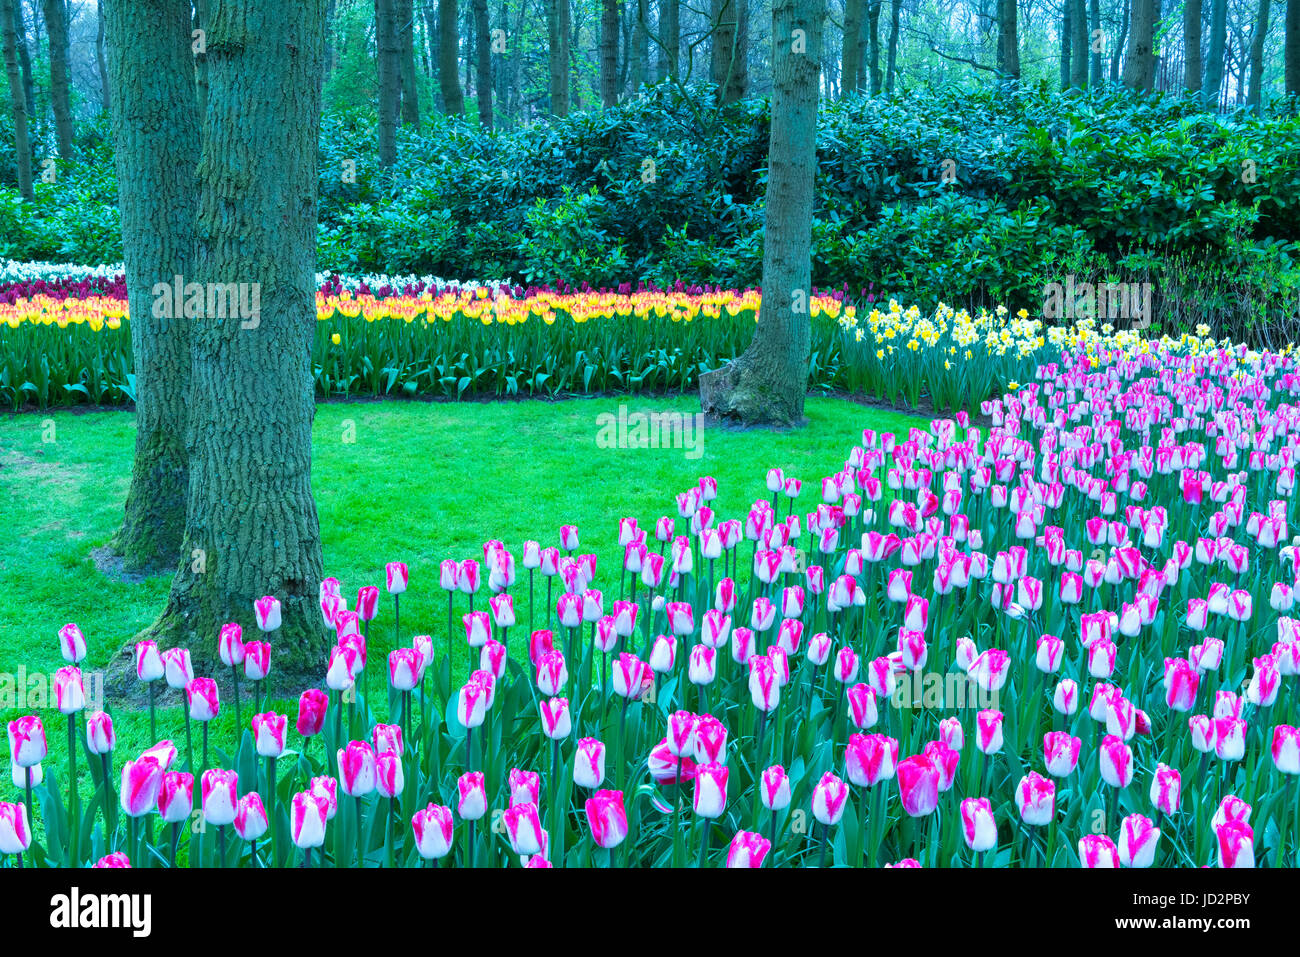 Rows of multi-colored tulips in bloom, Keukenhof Gardens Exhibit, Lisse, South Holland, The Netherlands Stock Photo